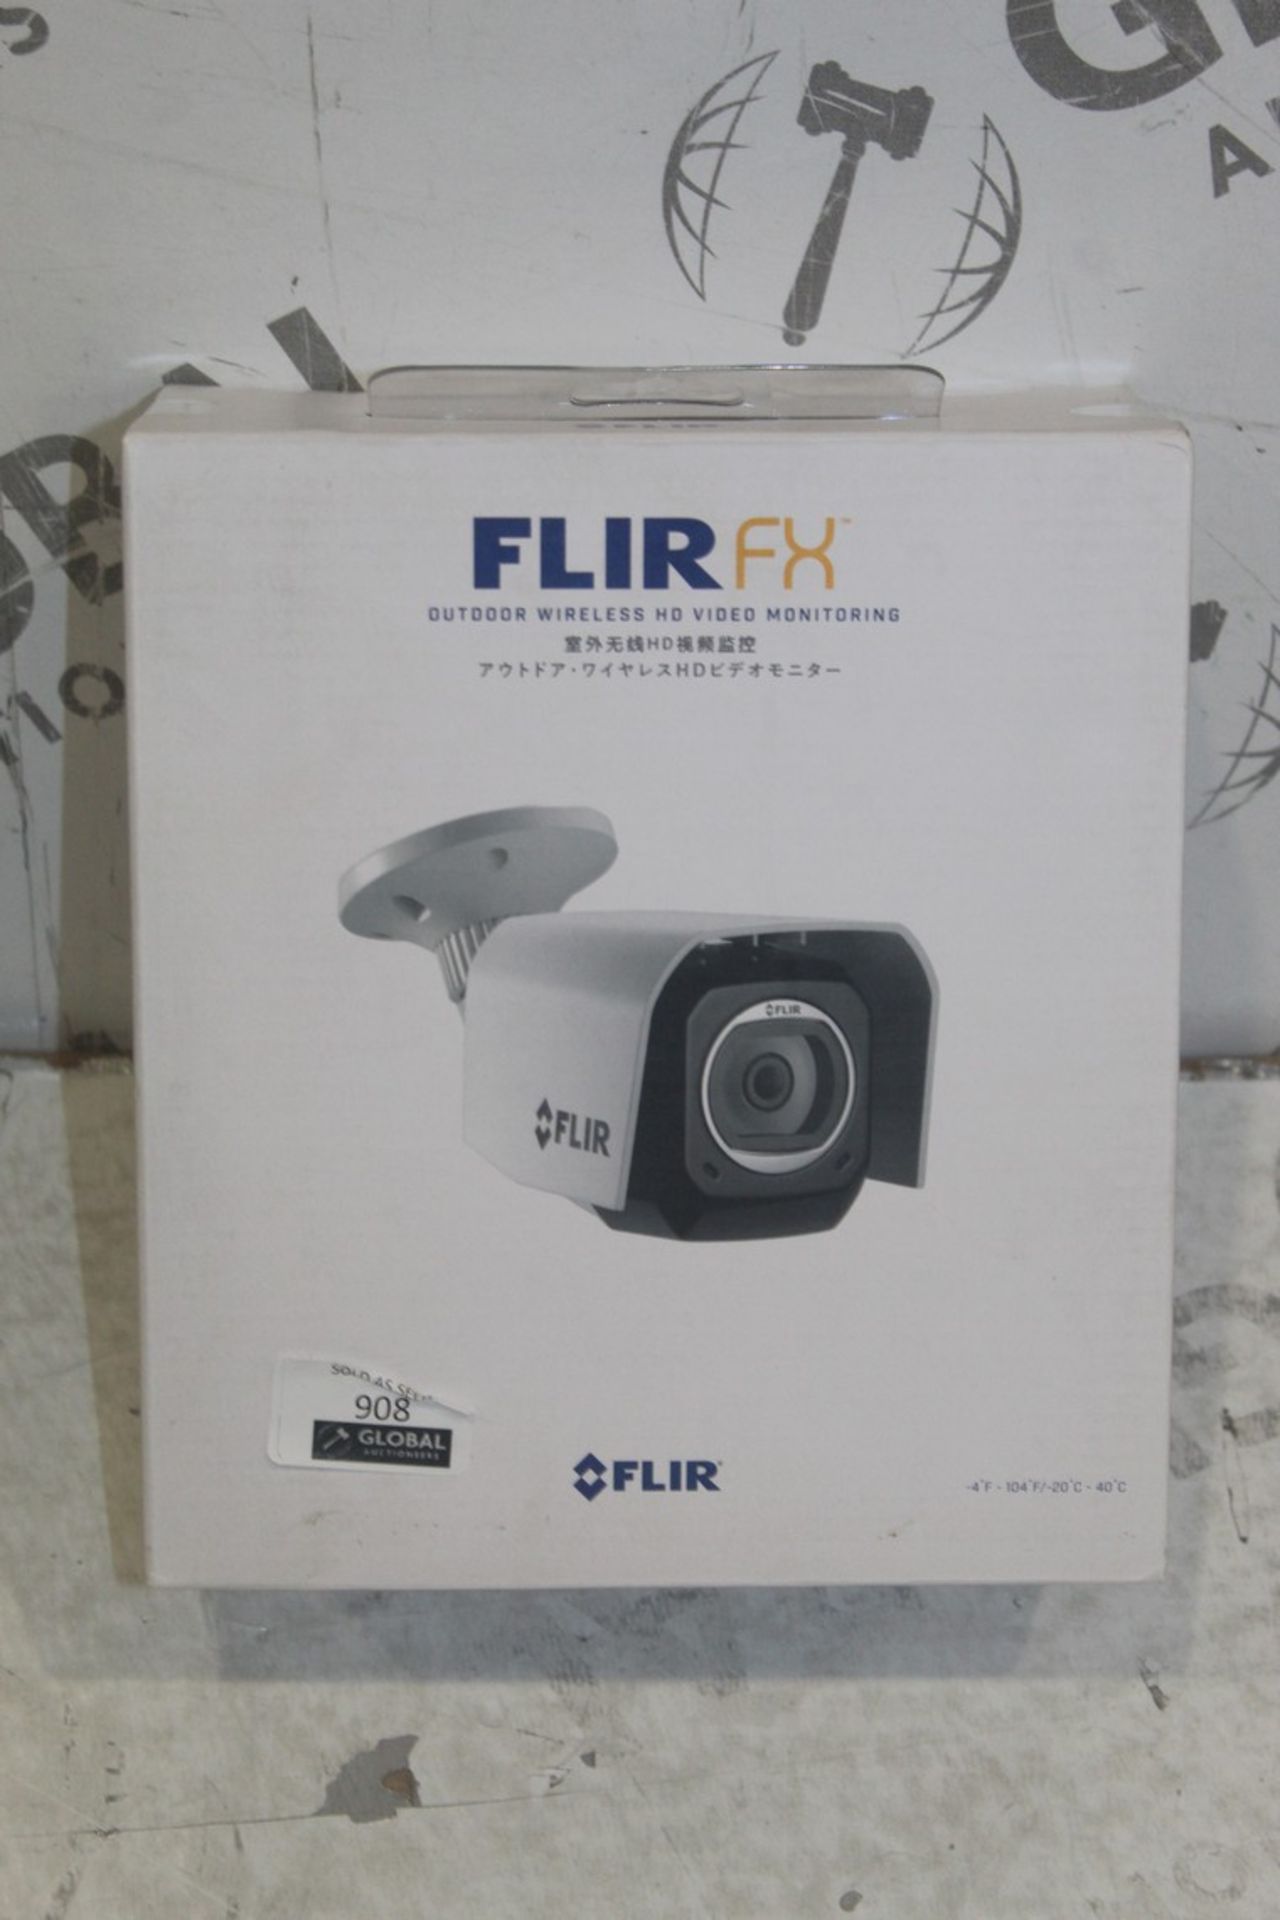 Boxed Flir FX Outdoor Wireless HD Video Monitoring CCTV Cameral RRP £300 (Pictures Are For